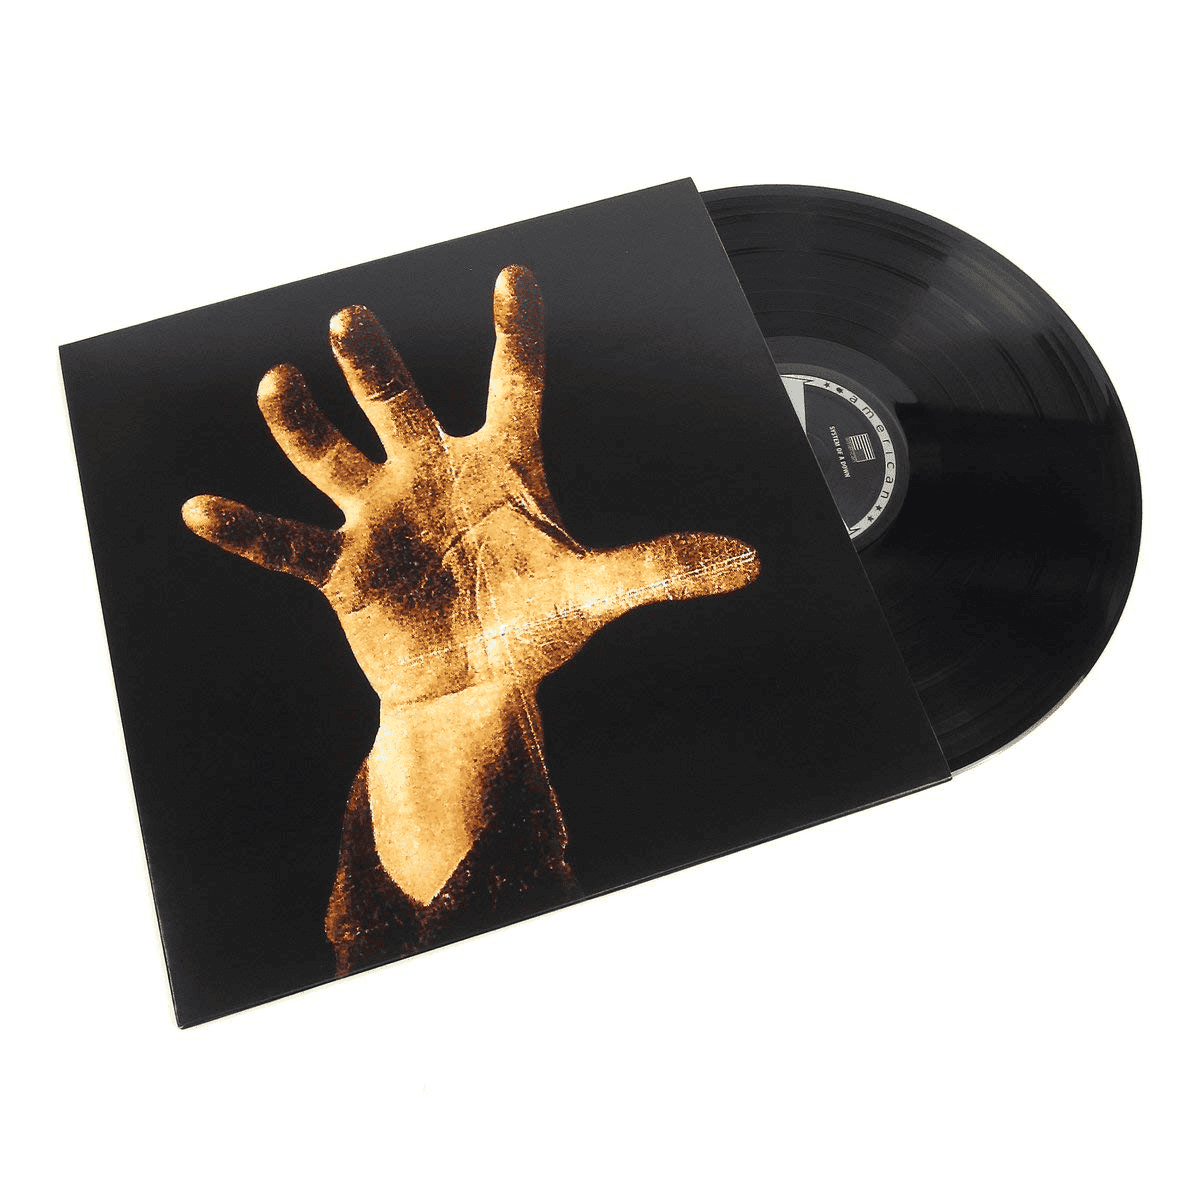 SYSTEM OF A DOWN - System Of A Down Vinyl - JWrayRecords